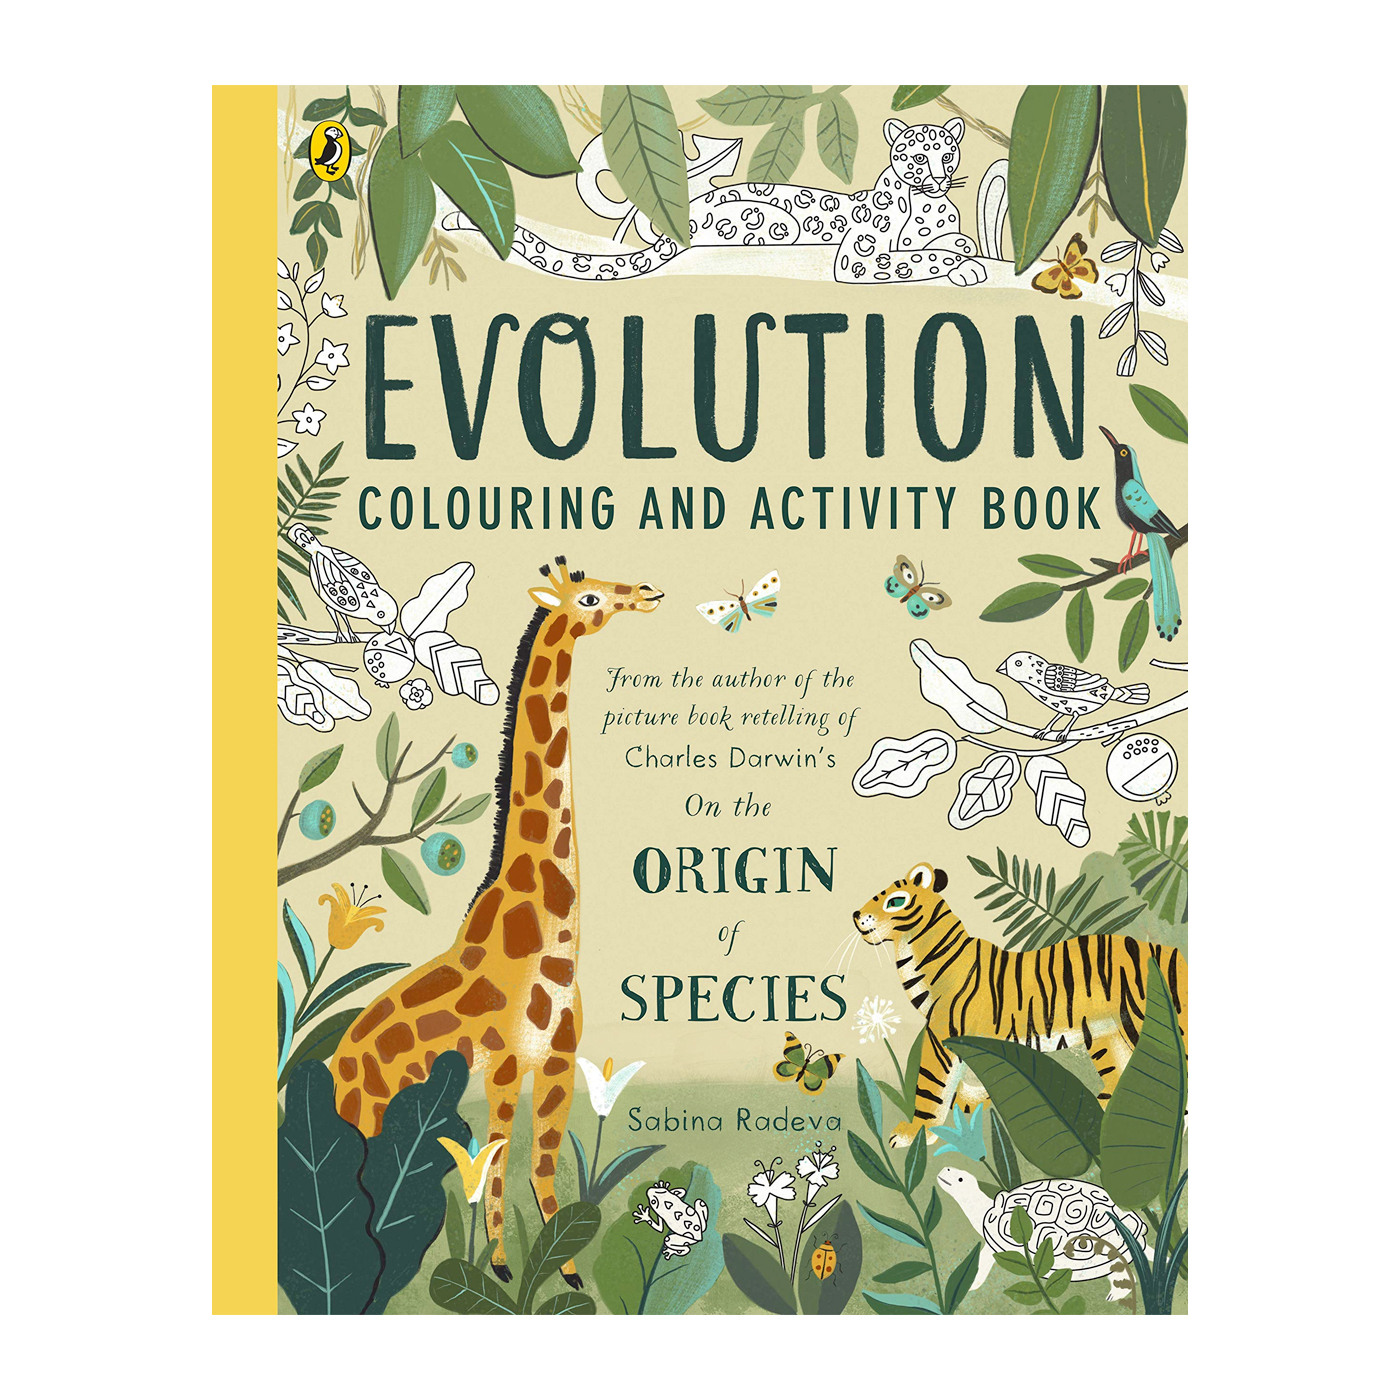  Evolution Colouring And Activity Book